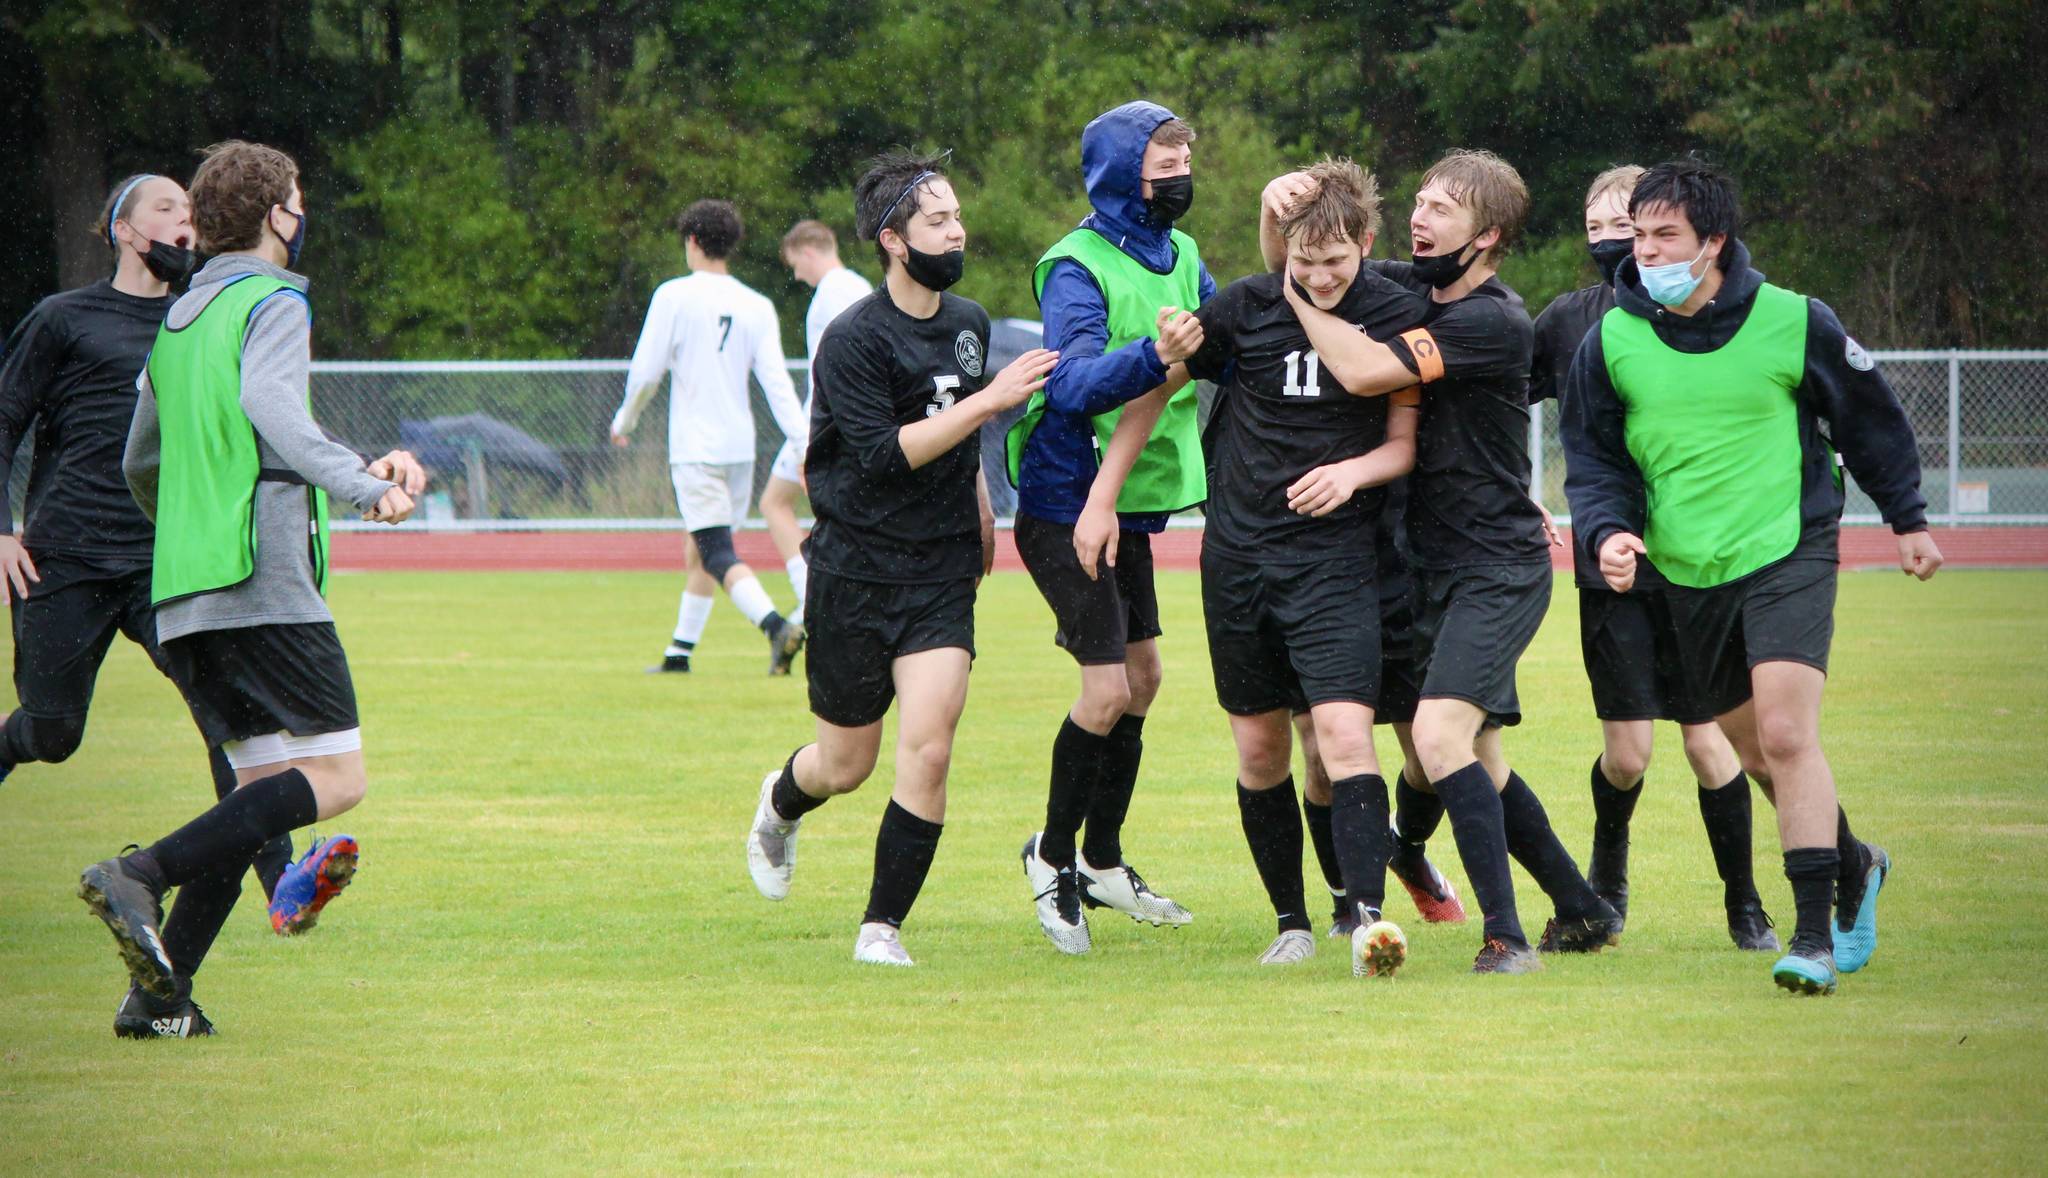 Corey Wiscomb/contributed photo
Viking players rush the field to congratulate Van Putten on the shot and celebrate the win.